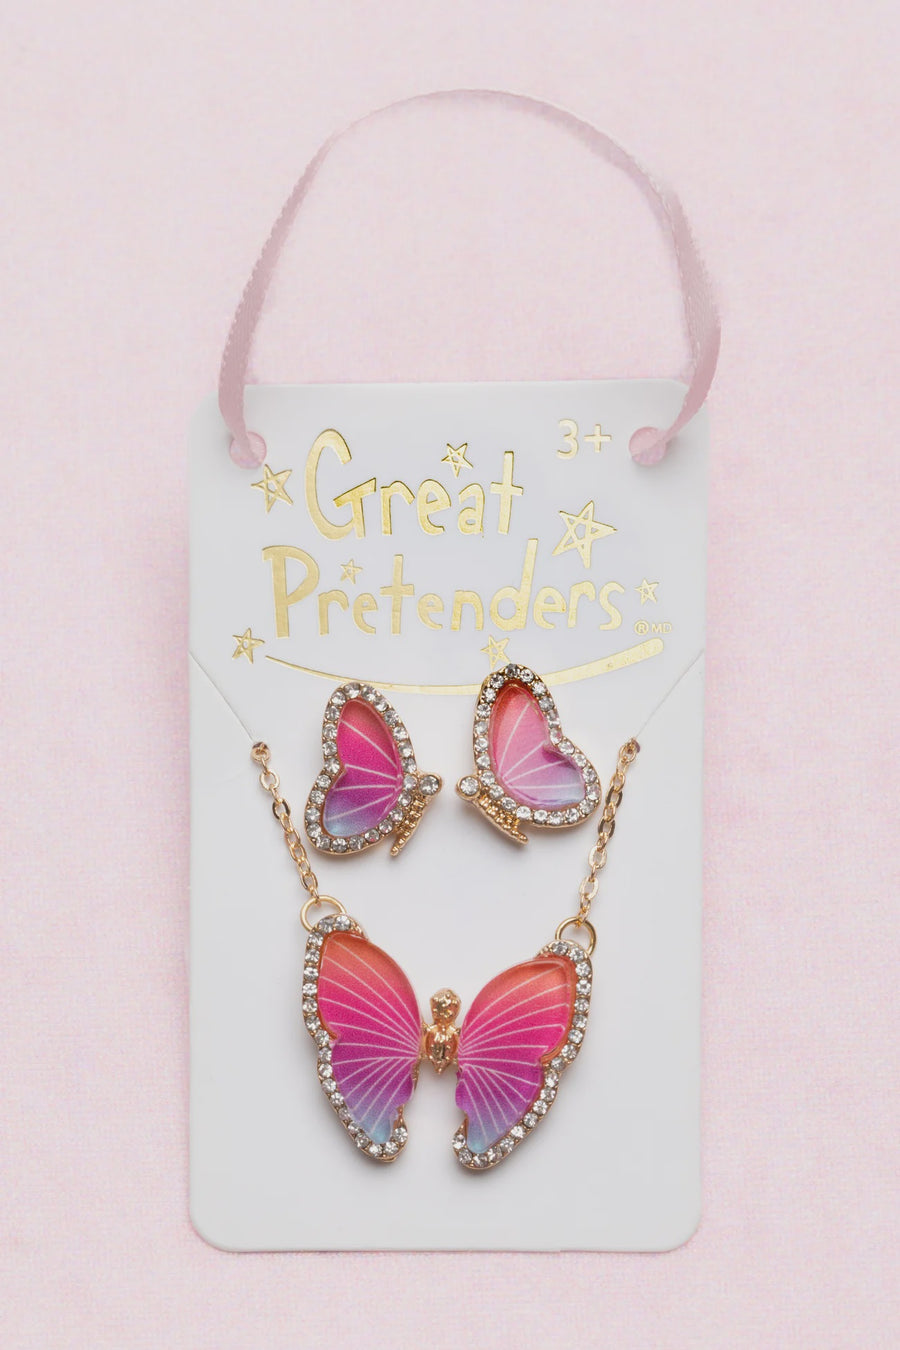 Great Pretenders - Butterfly Necklace and Stud Set